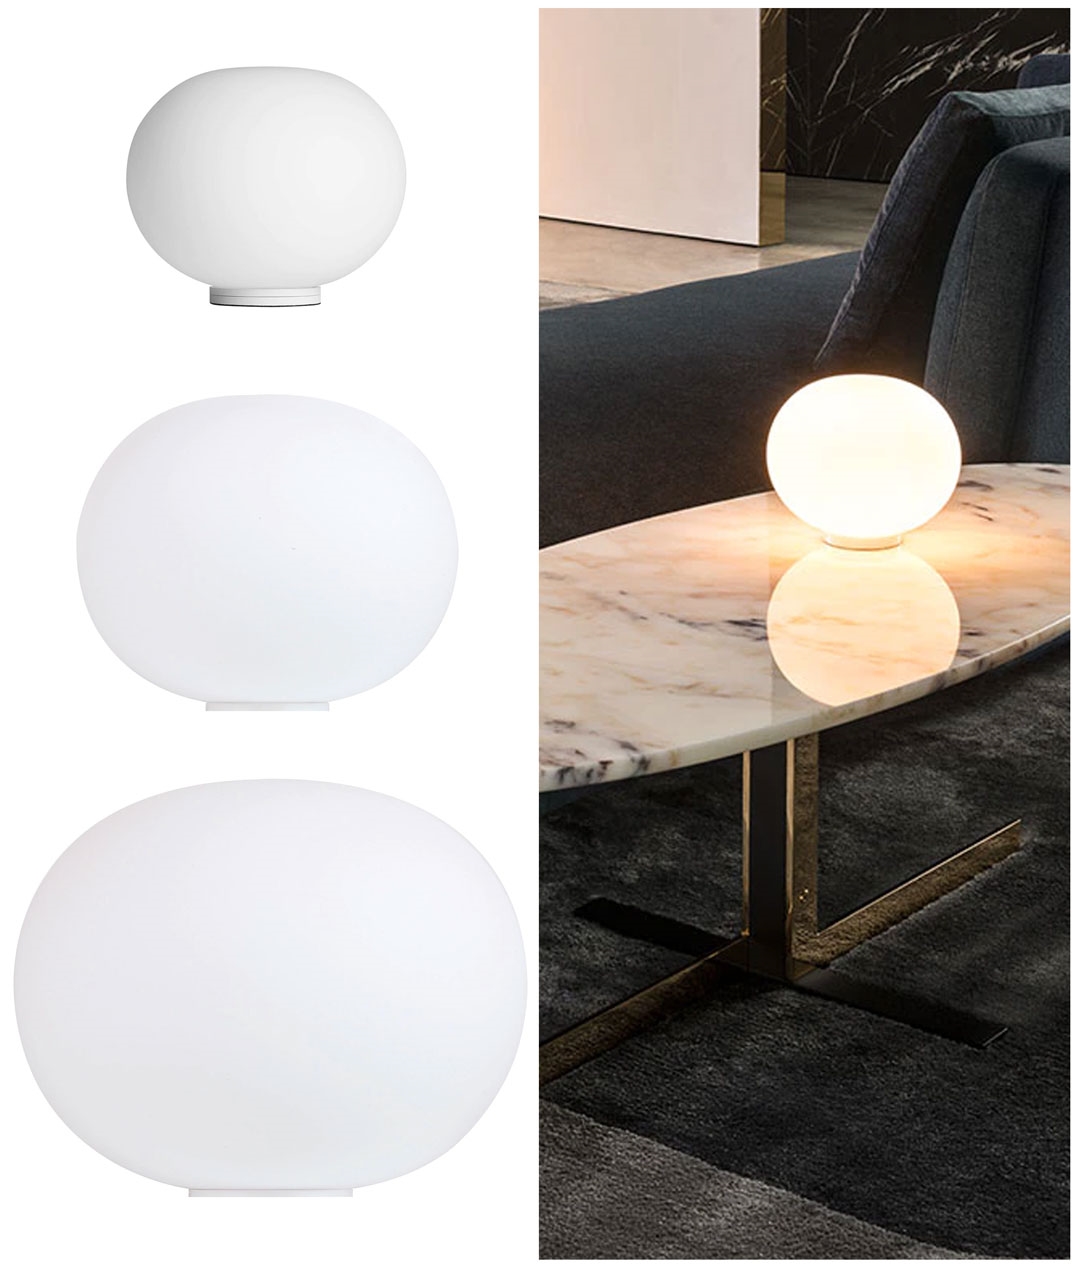 Dimmable Flos Glo Ball Designer Table Lamps, Flos Glo Ball Table Lamp